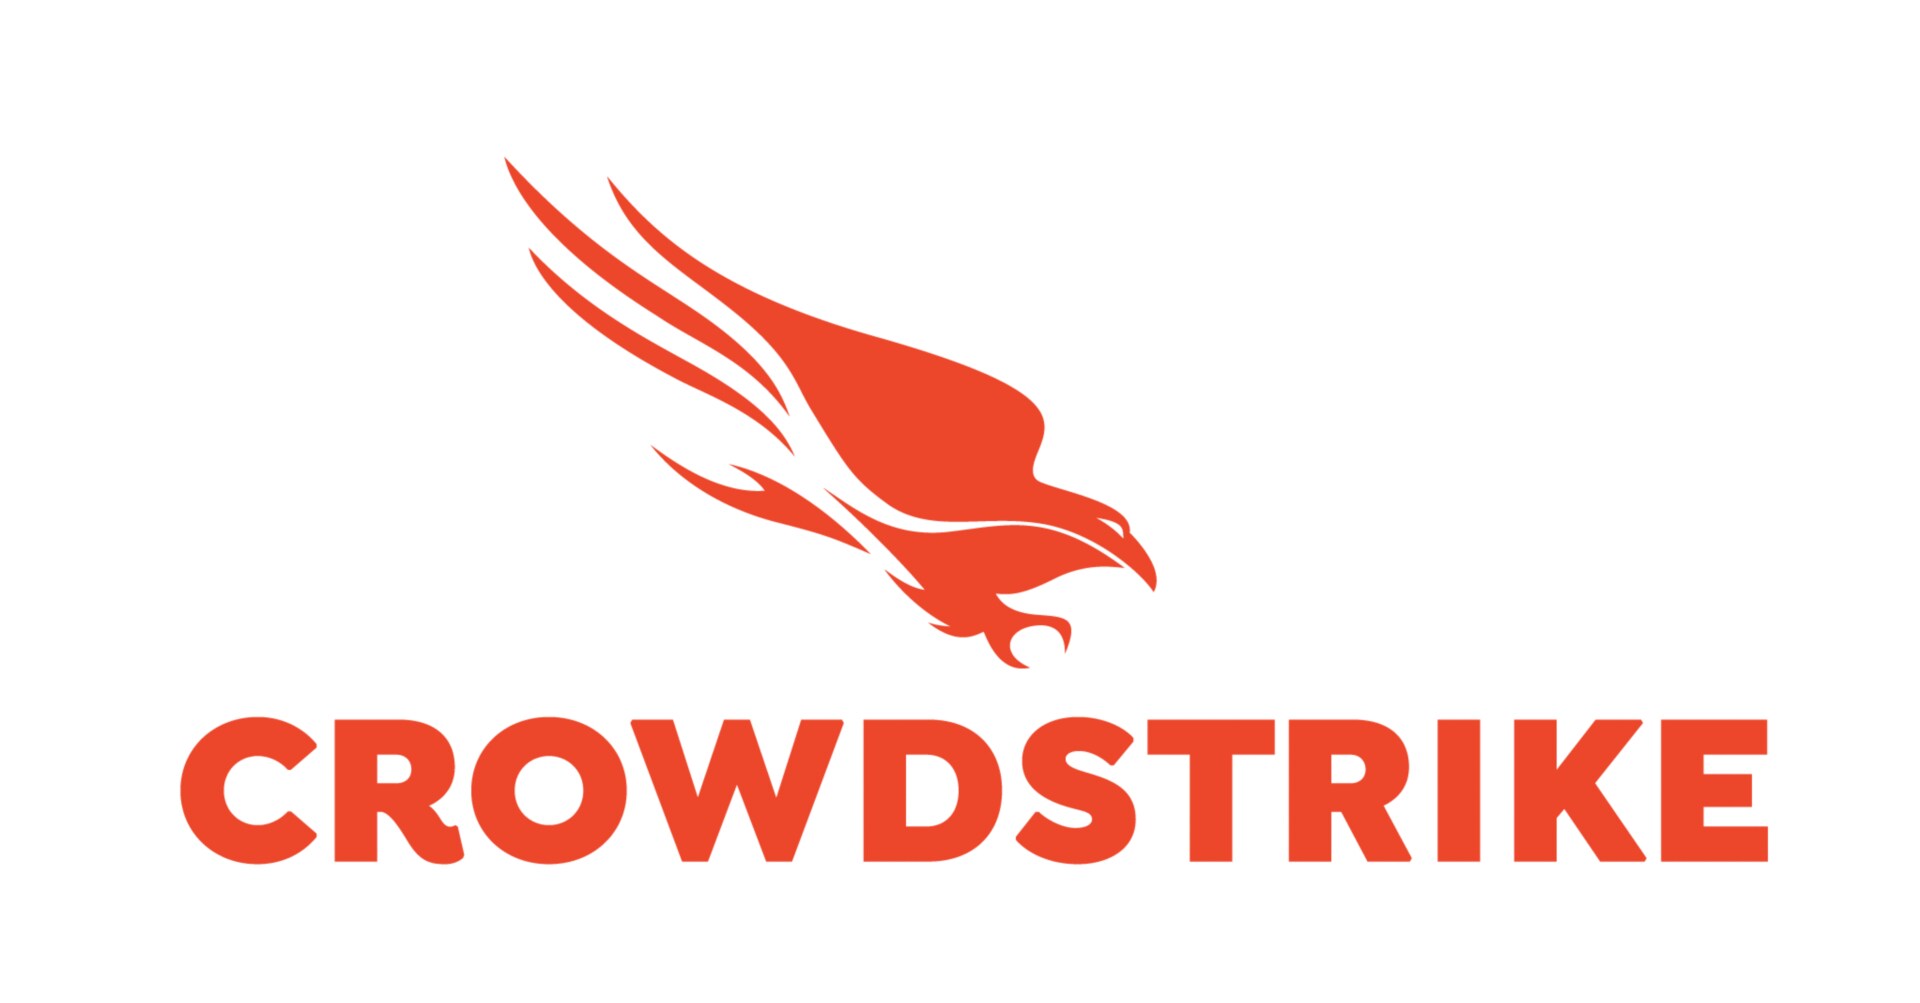 CrowdStrike 7-Month Express Support